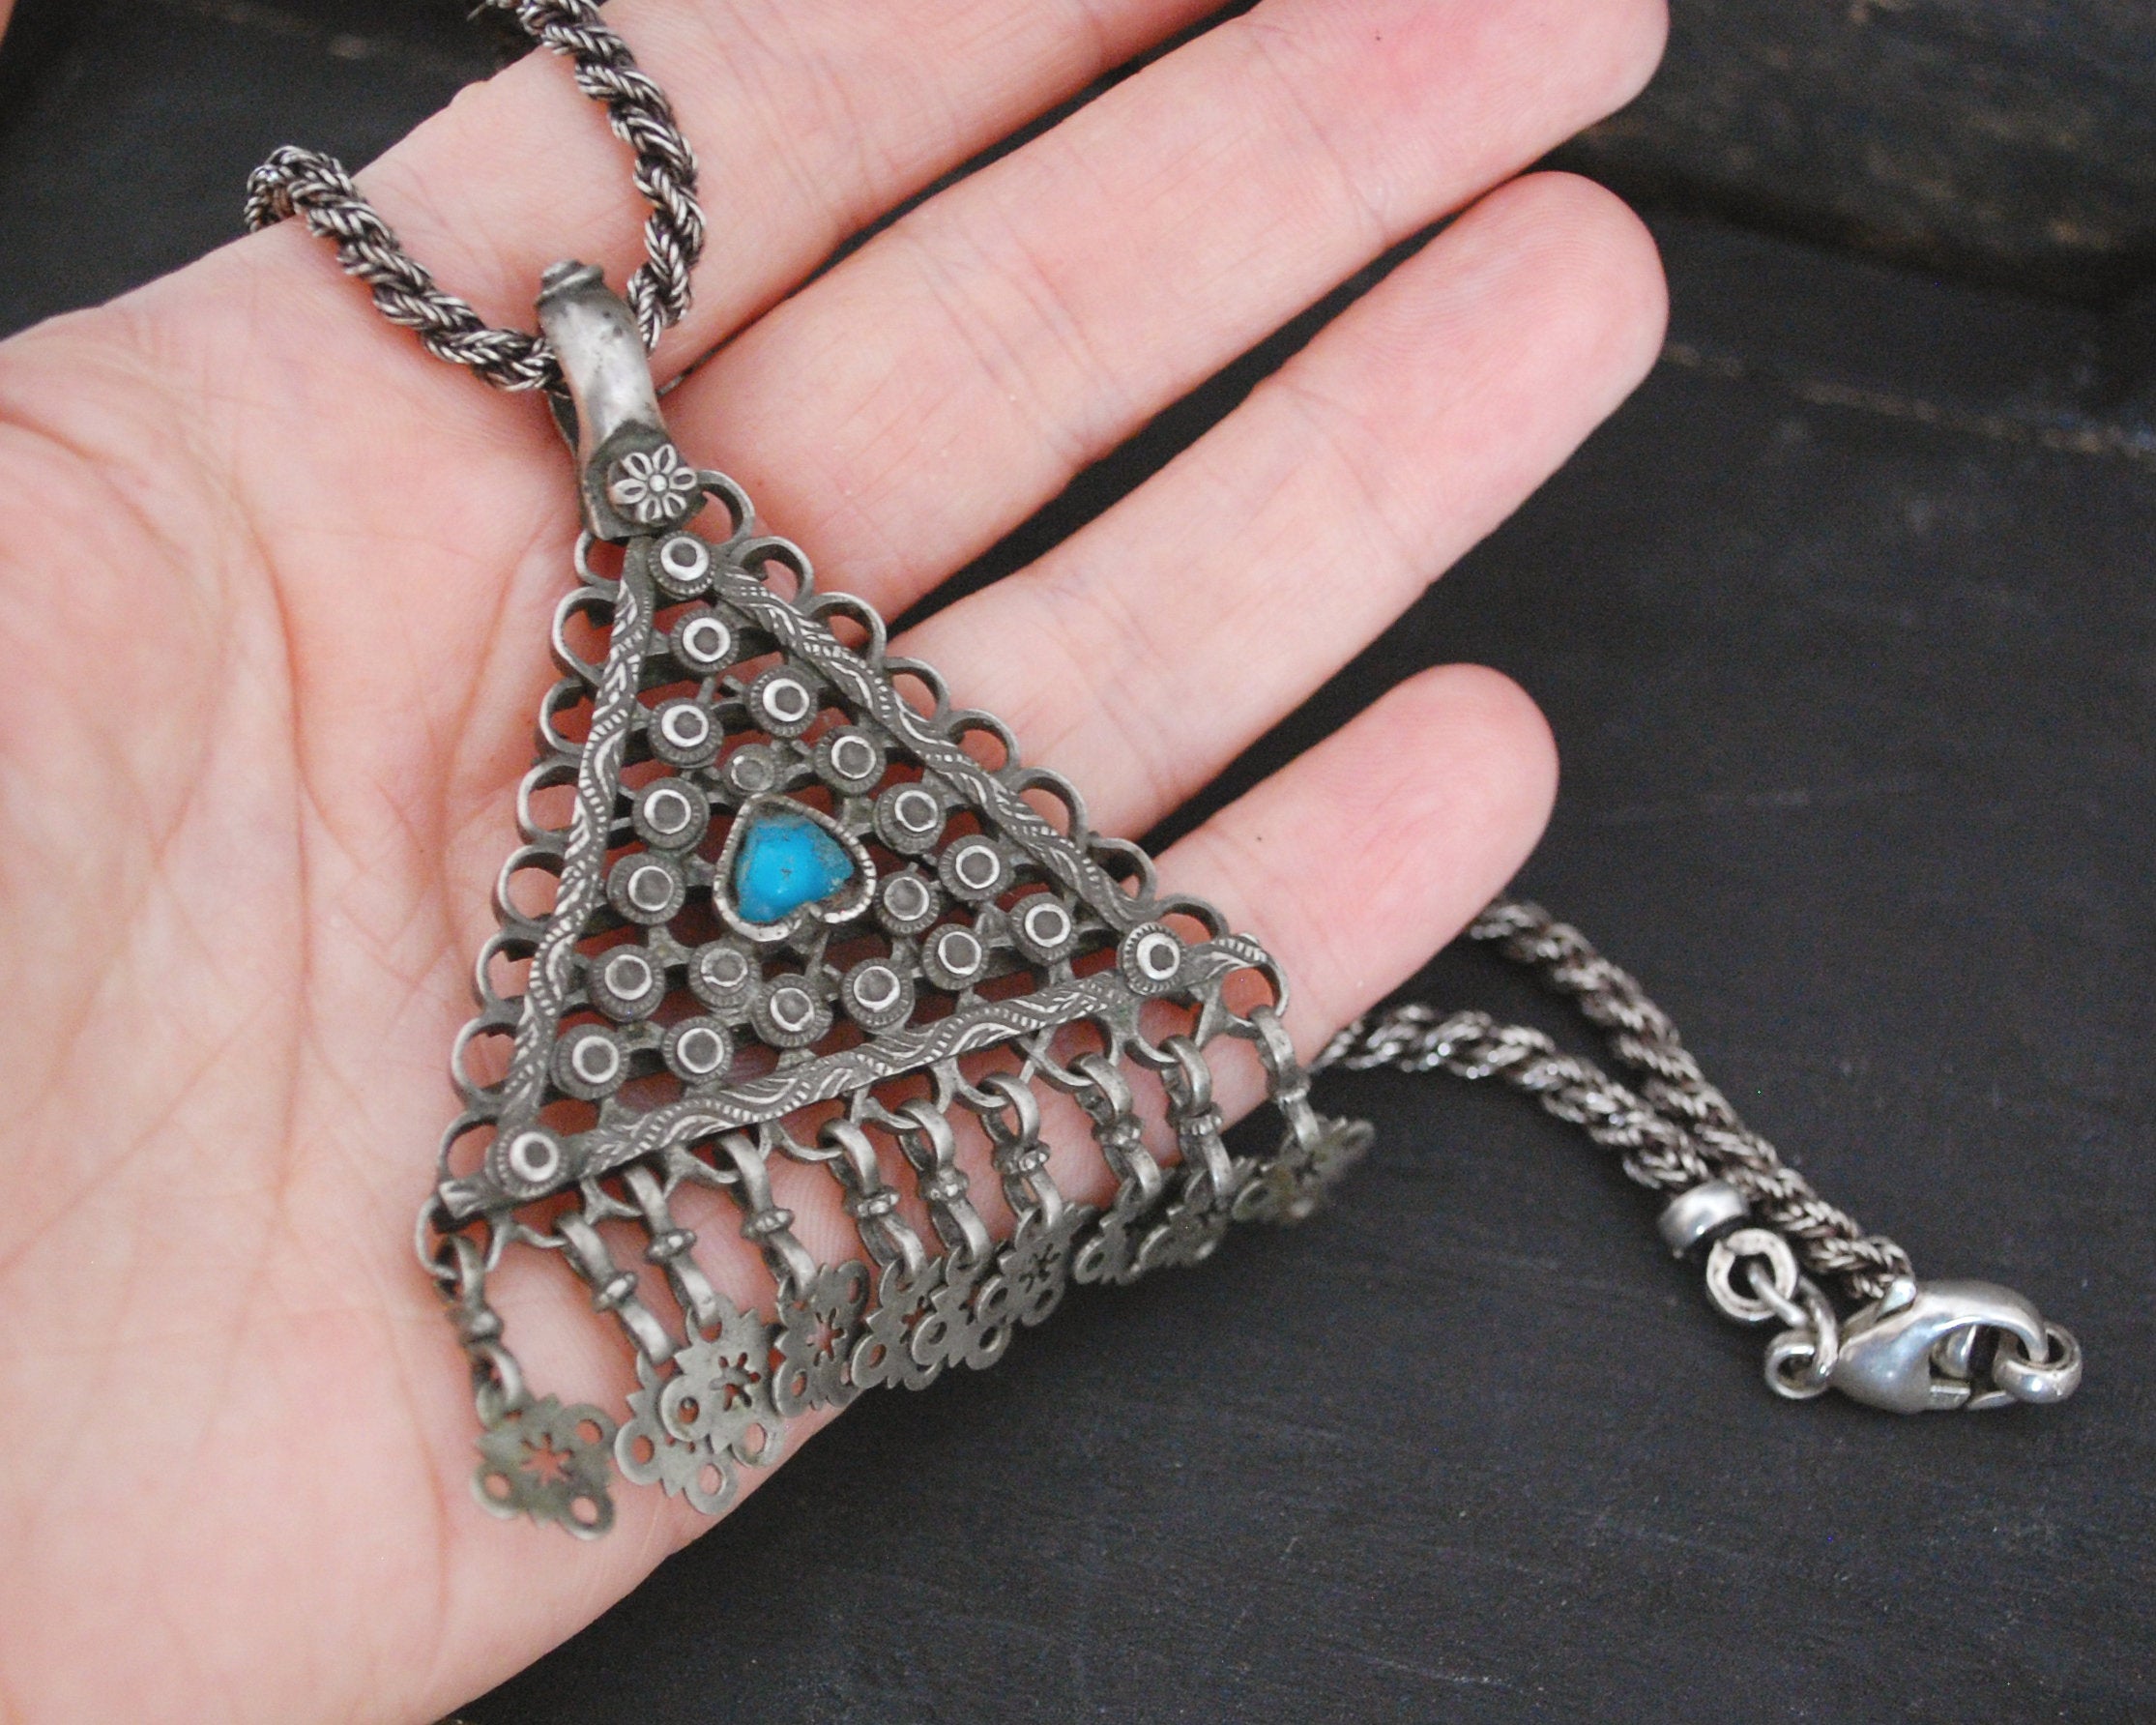 Antique Afghani Silver Turquoise Pendant on Woven Chain